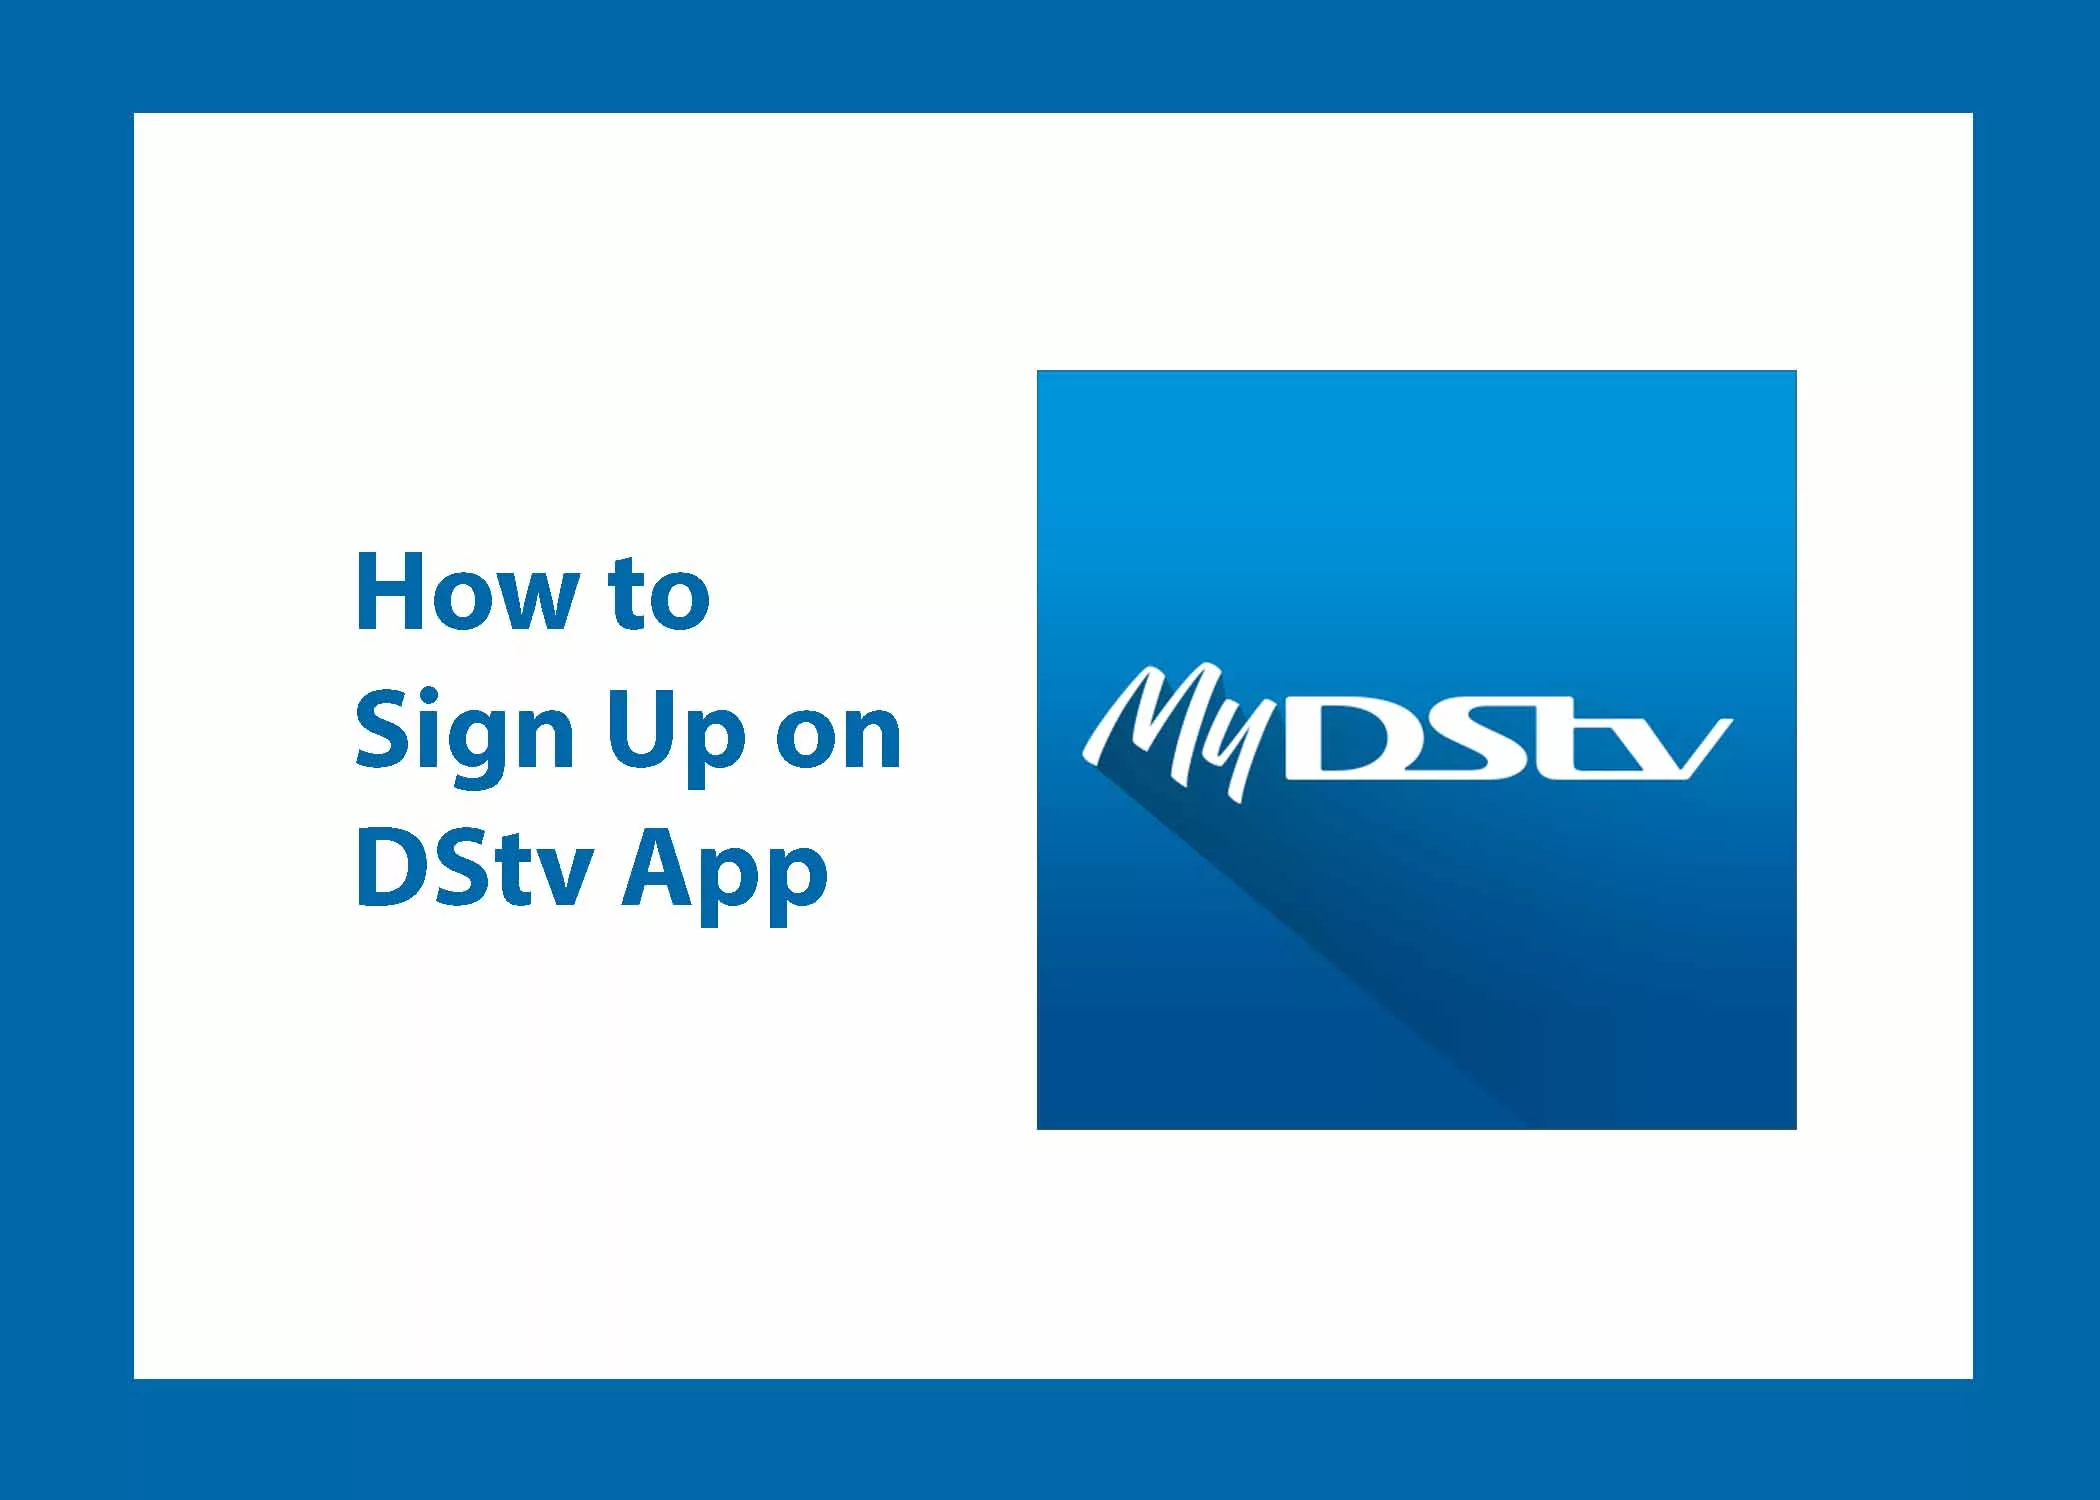 How to Sign Up on DStv App